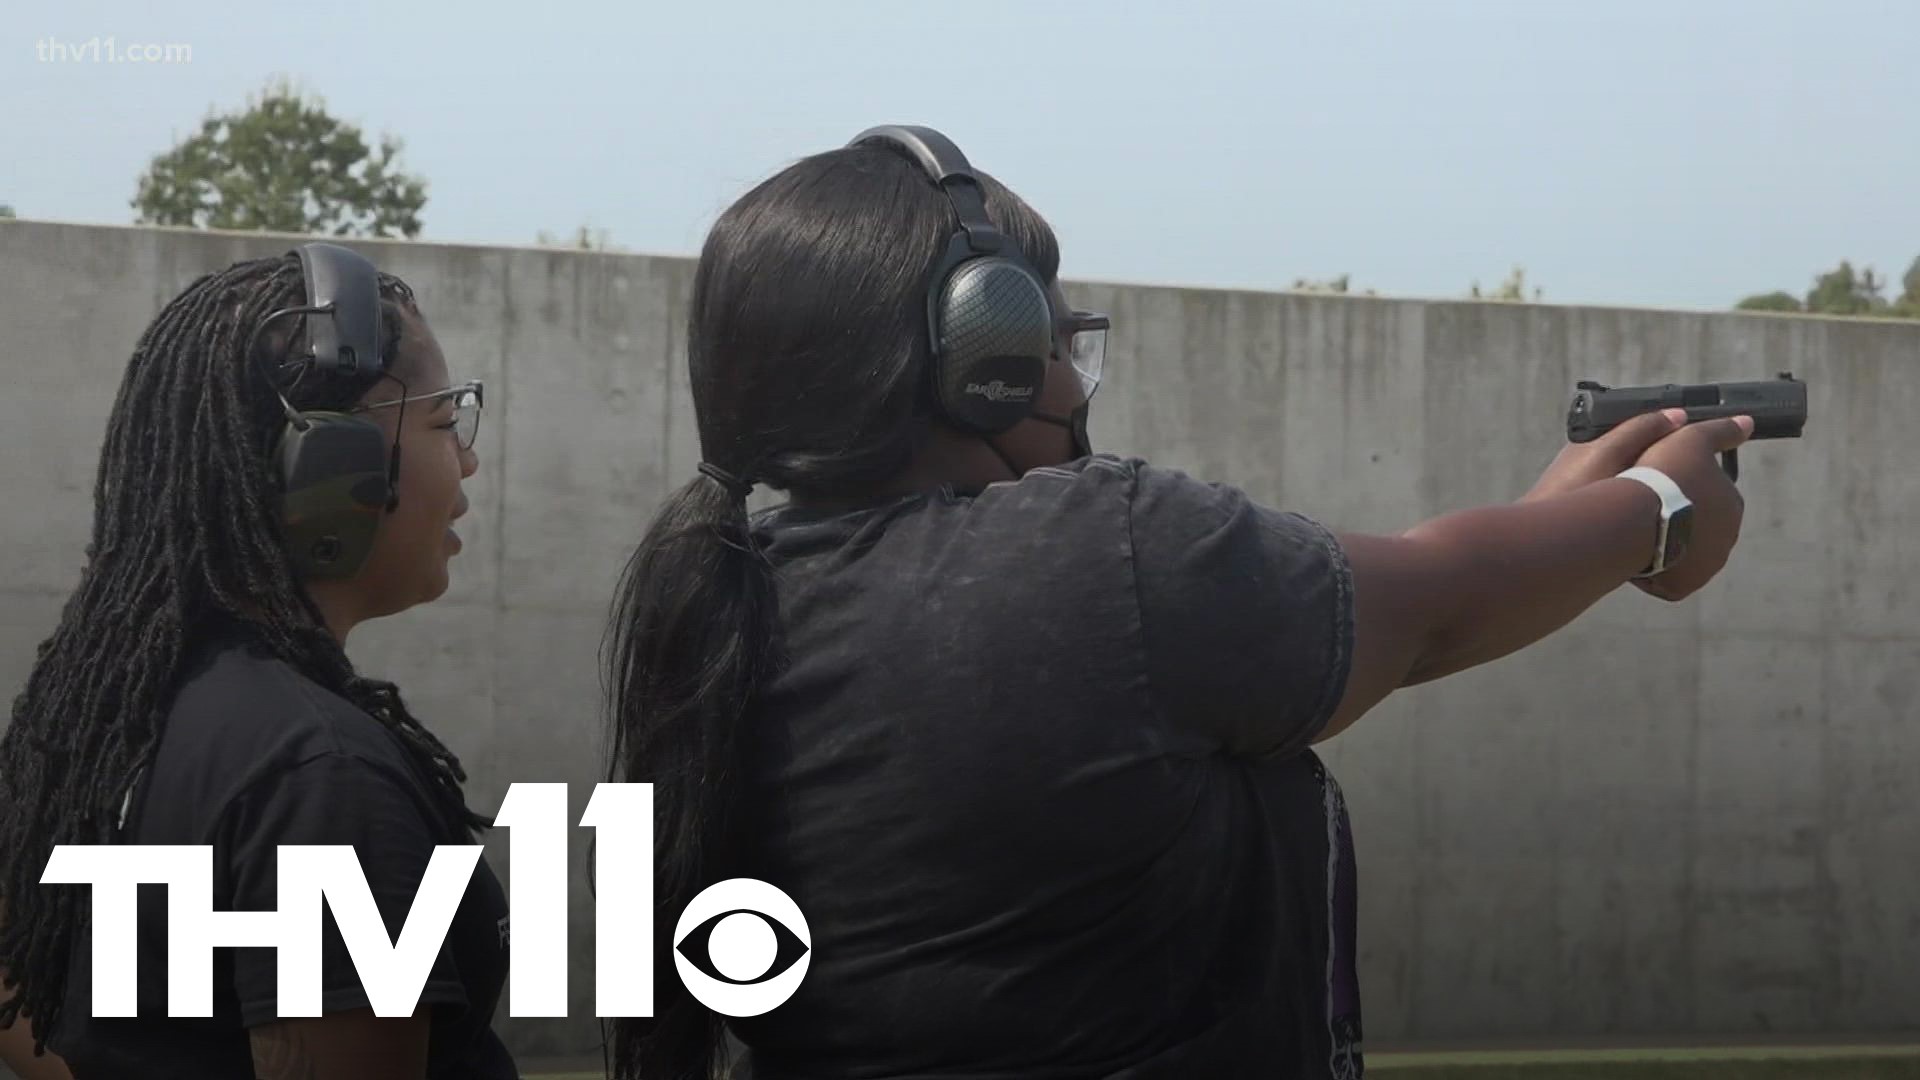 Desstoni Johnson saw a need for more inclusive and relatable firearms training for women. She knew first-hand how off-putting the gun industry can be.